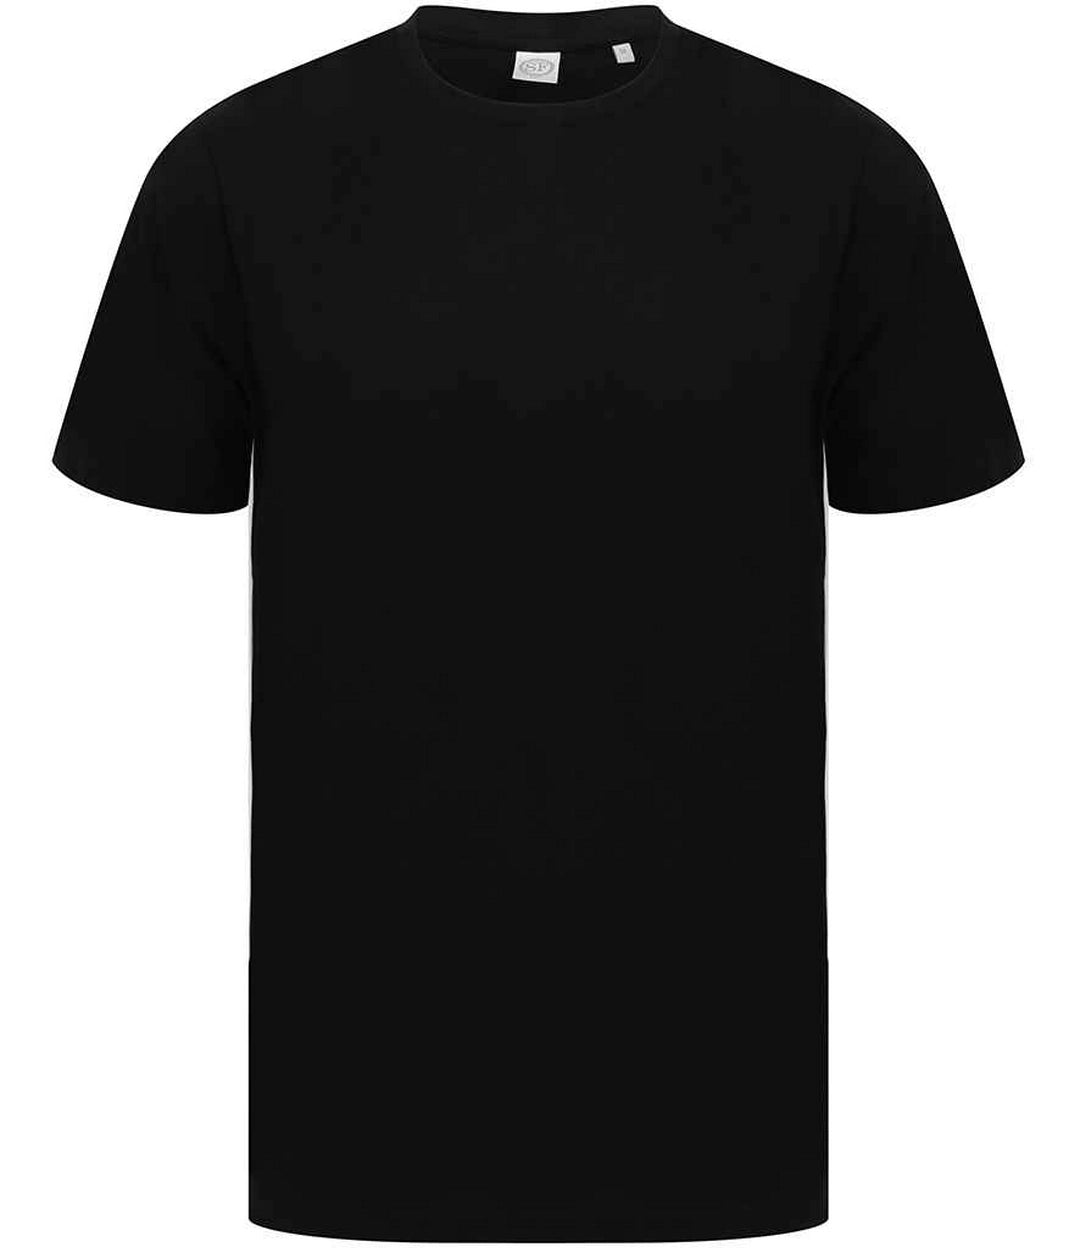 Skinni Fit SF253 Unisex Contrast T-Shirt - COOZO